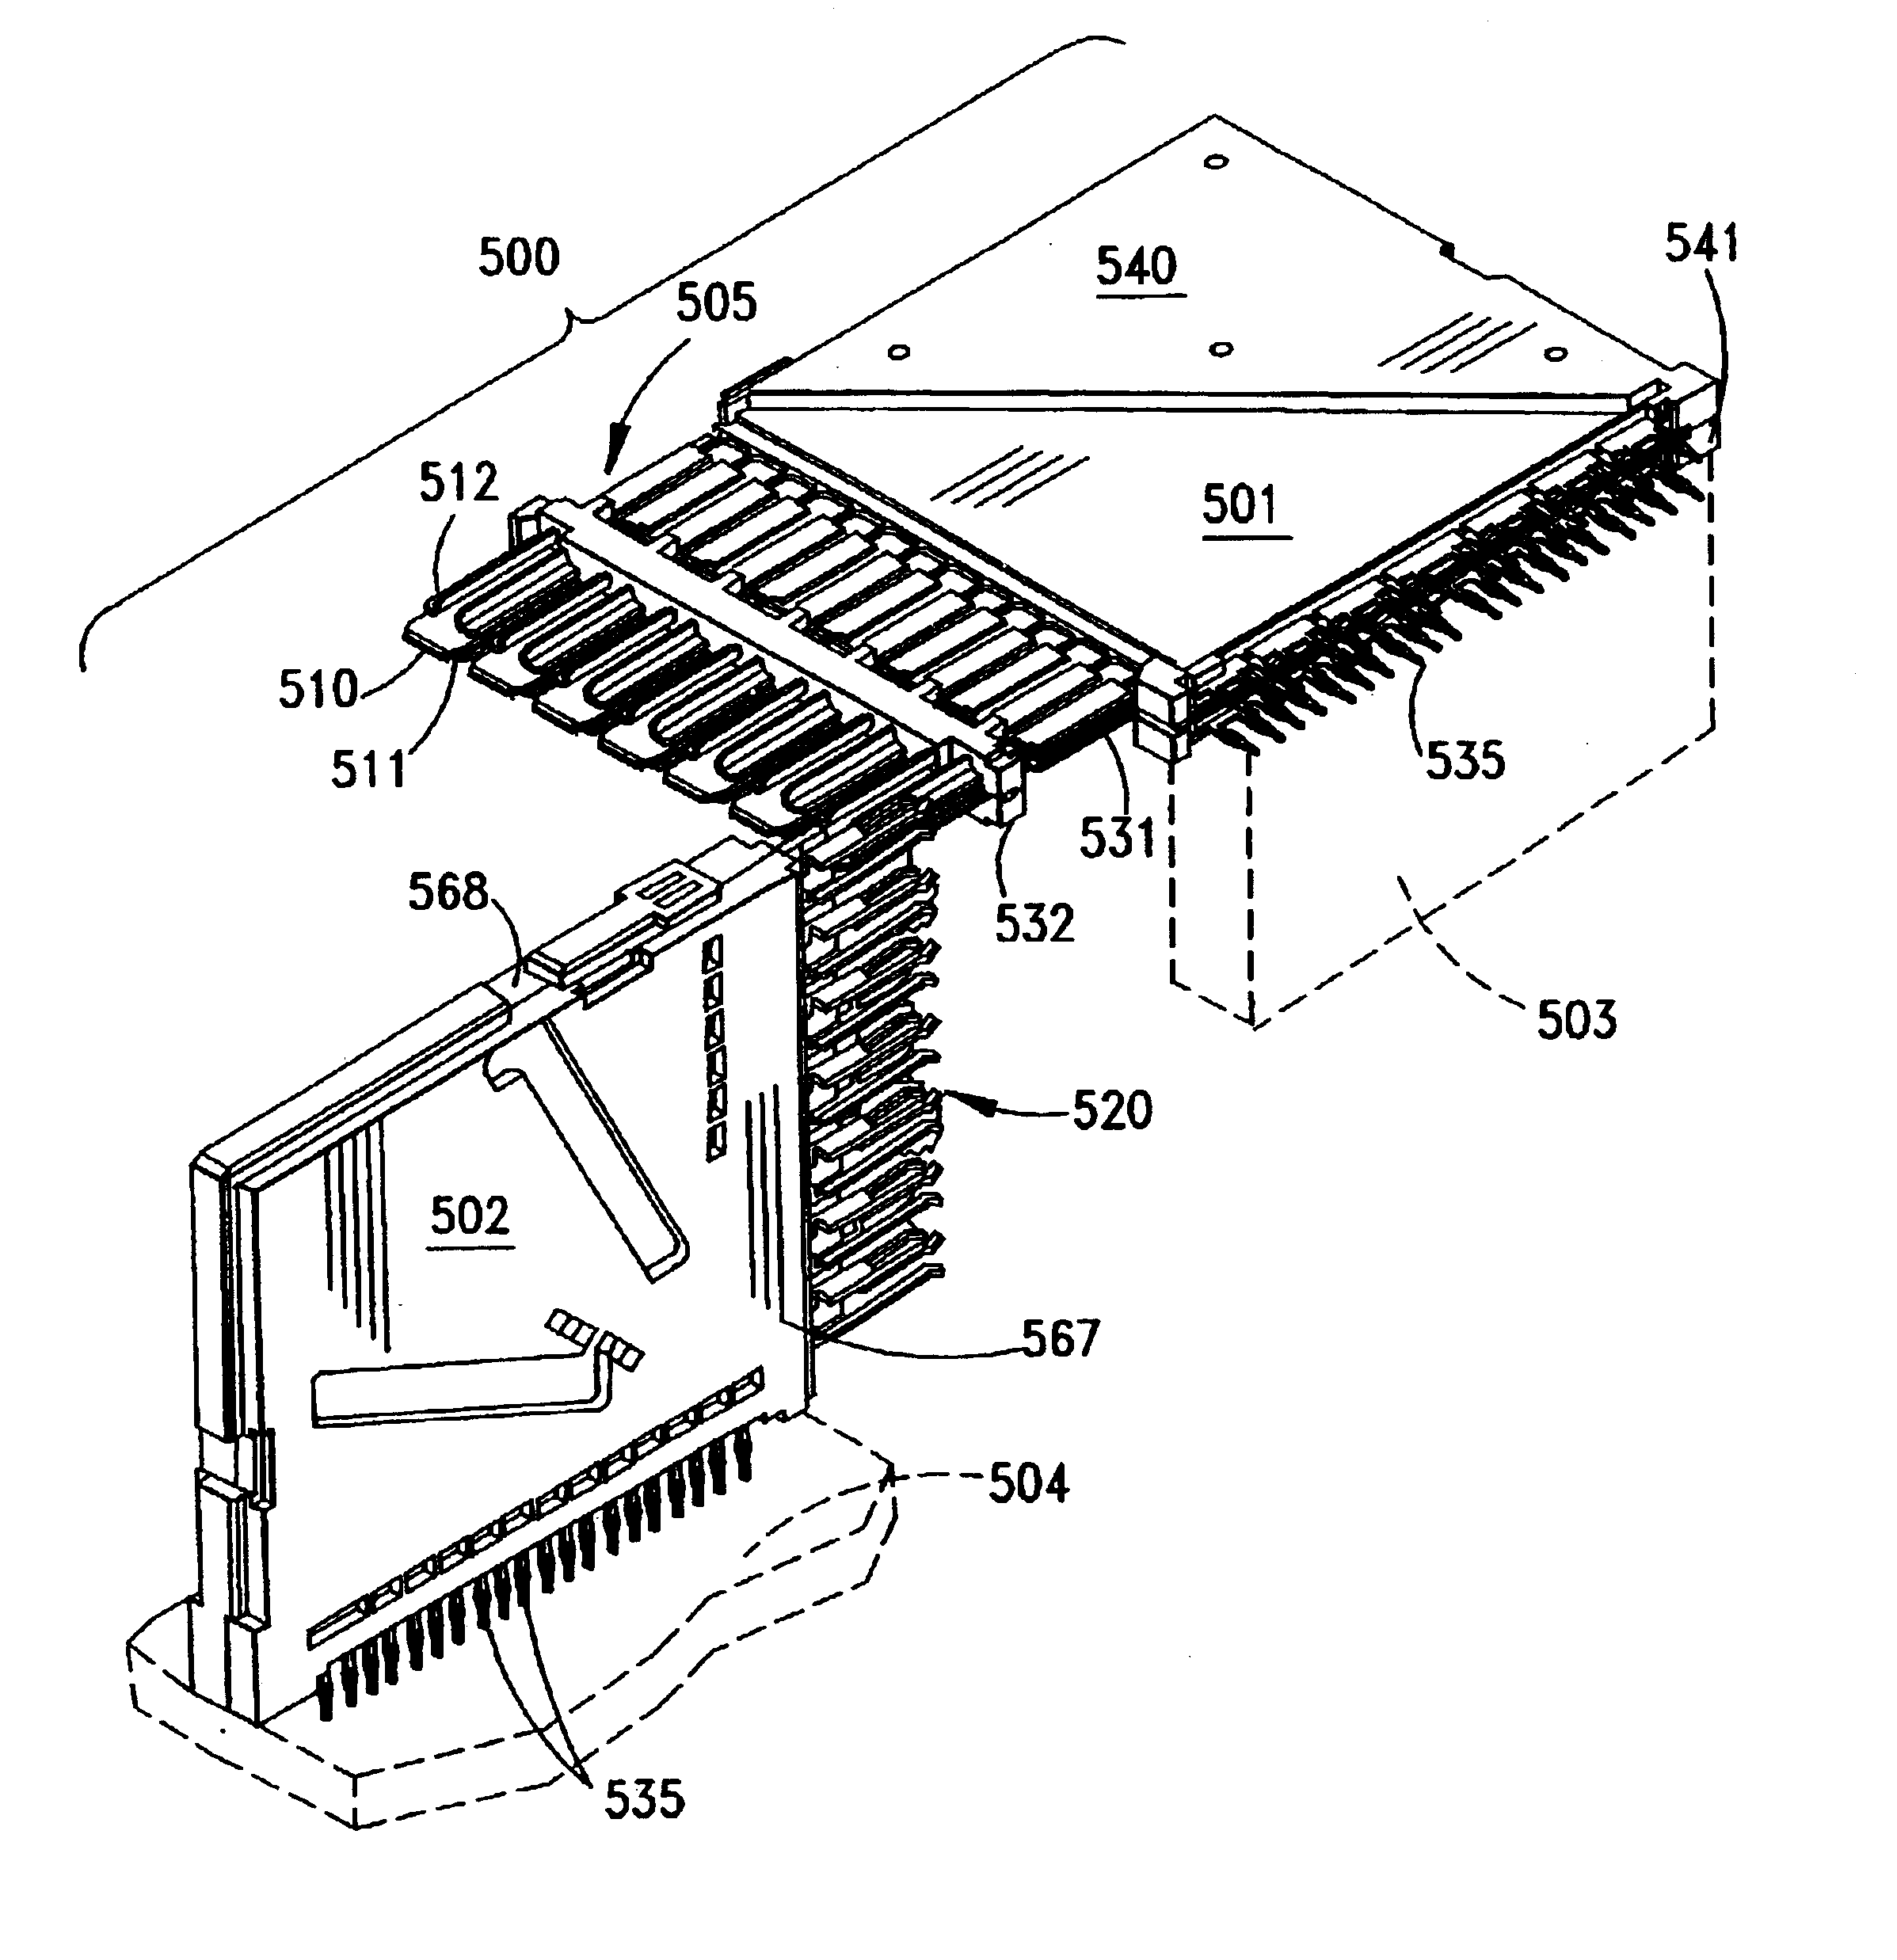 High-density connector assembly with flexural capabilities